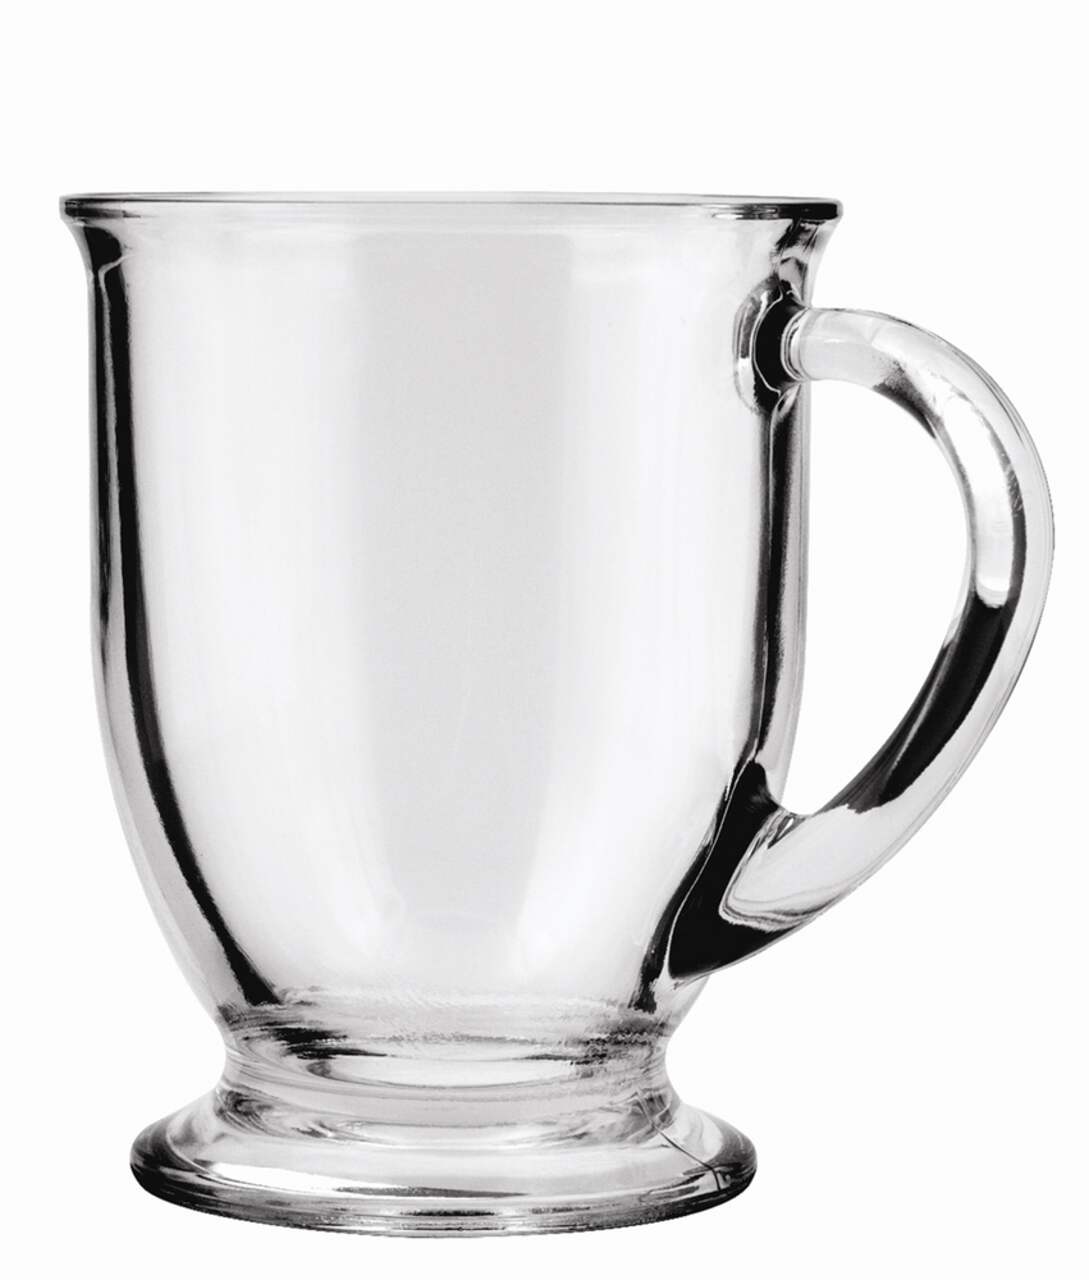 https://media-www.canadiantire.ca/product/living/kitchen/dining-and-entertaining/0429308/pedestal-coffee-mug-52d1f13c-a7de-4d46-9ac9-50e372eb5c97.png?imdensity=1&imwidth=640&impolicy=mZoom